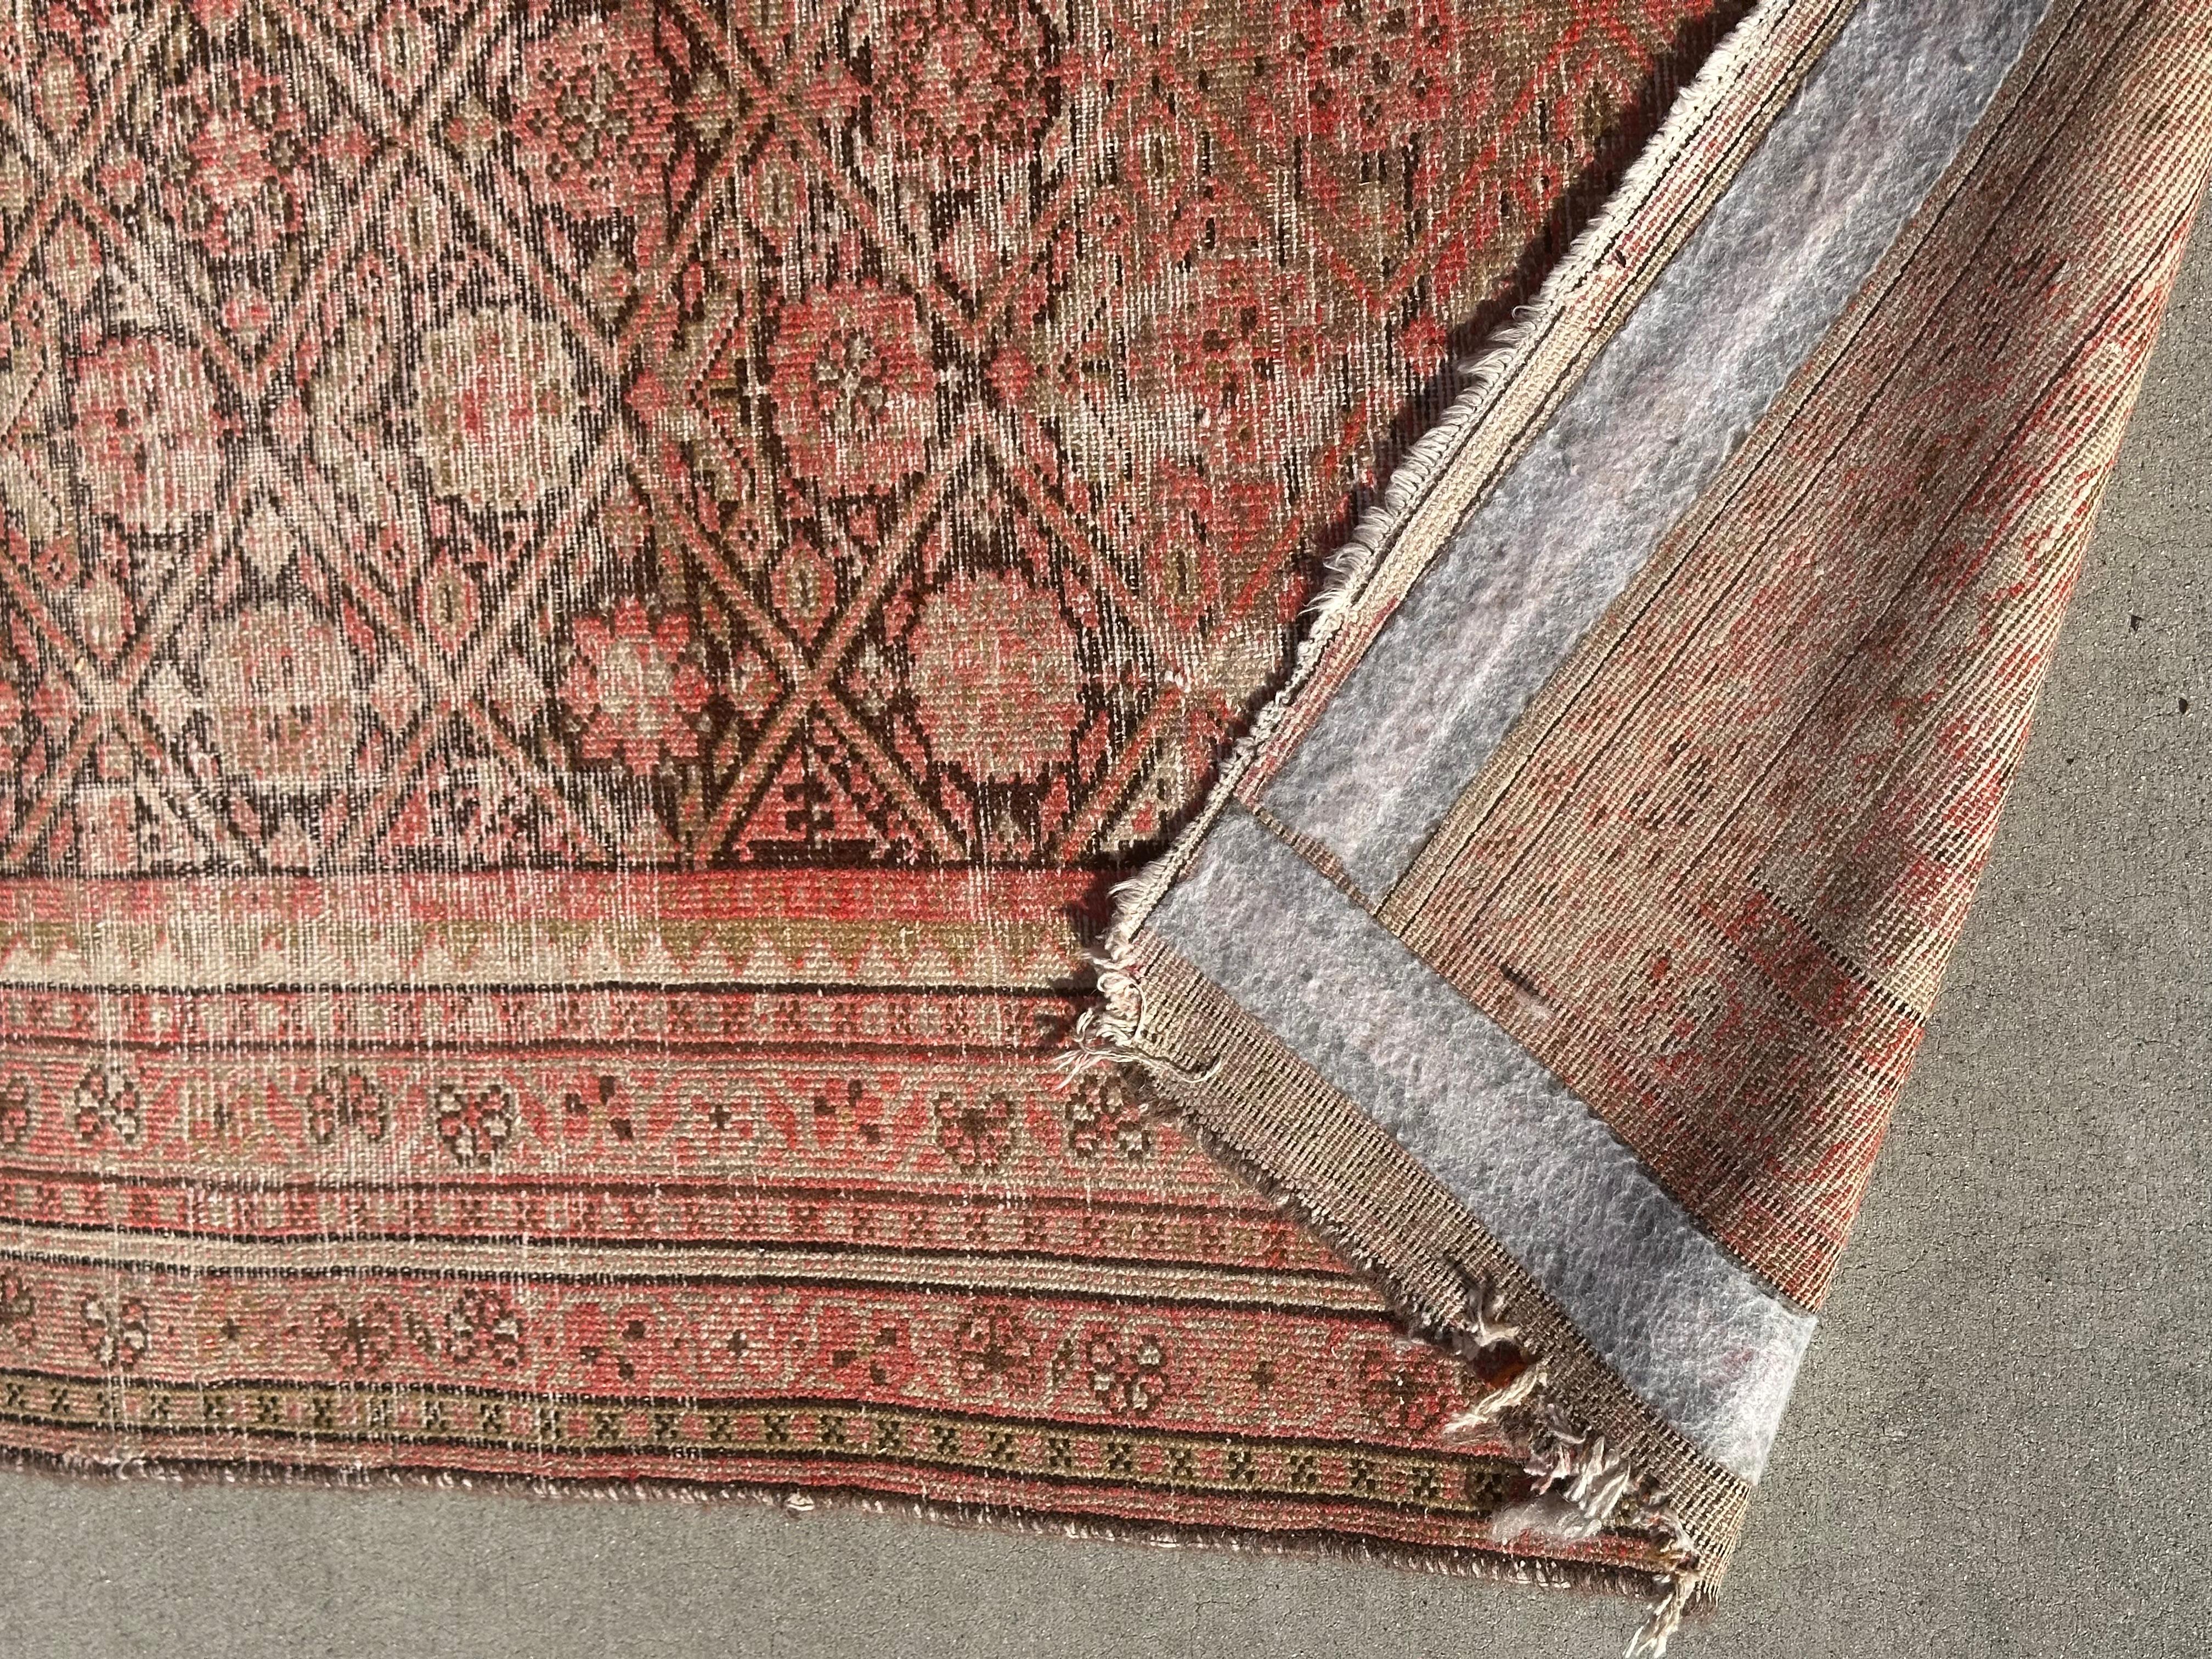 Antique Malayer Persian Wool Runner Rug. It is beautifully worn and thread baring. Edge wear illustrated.